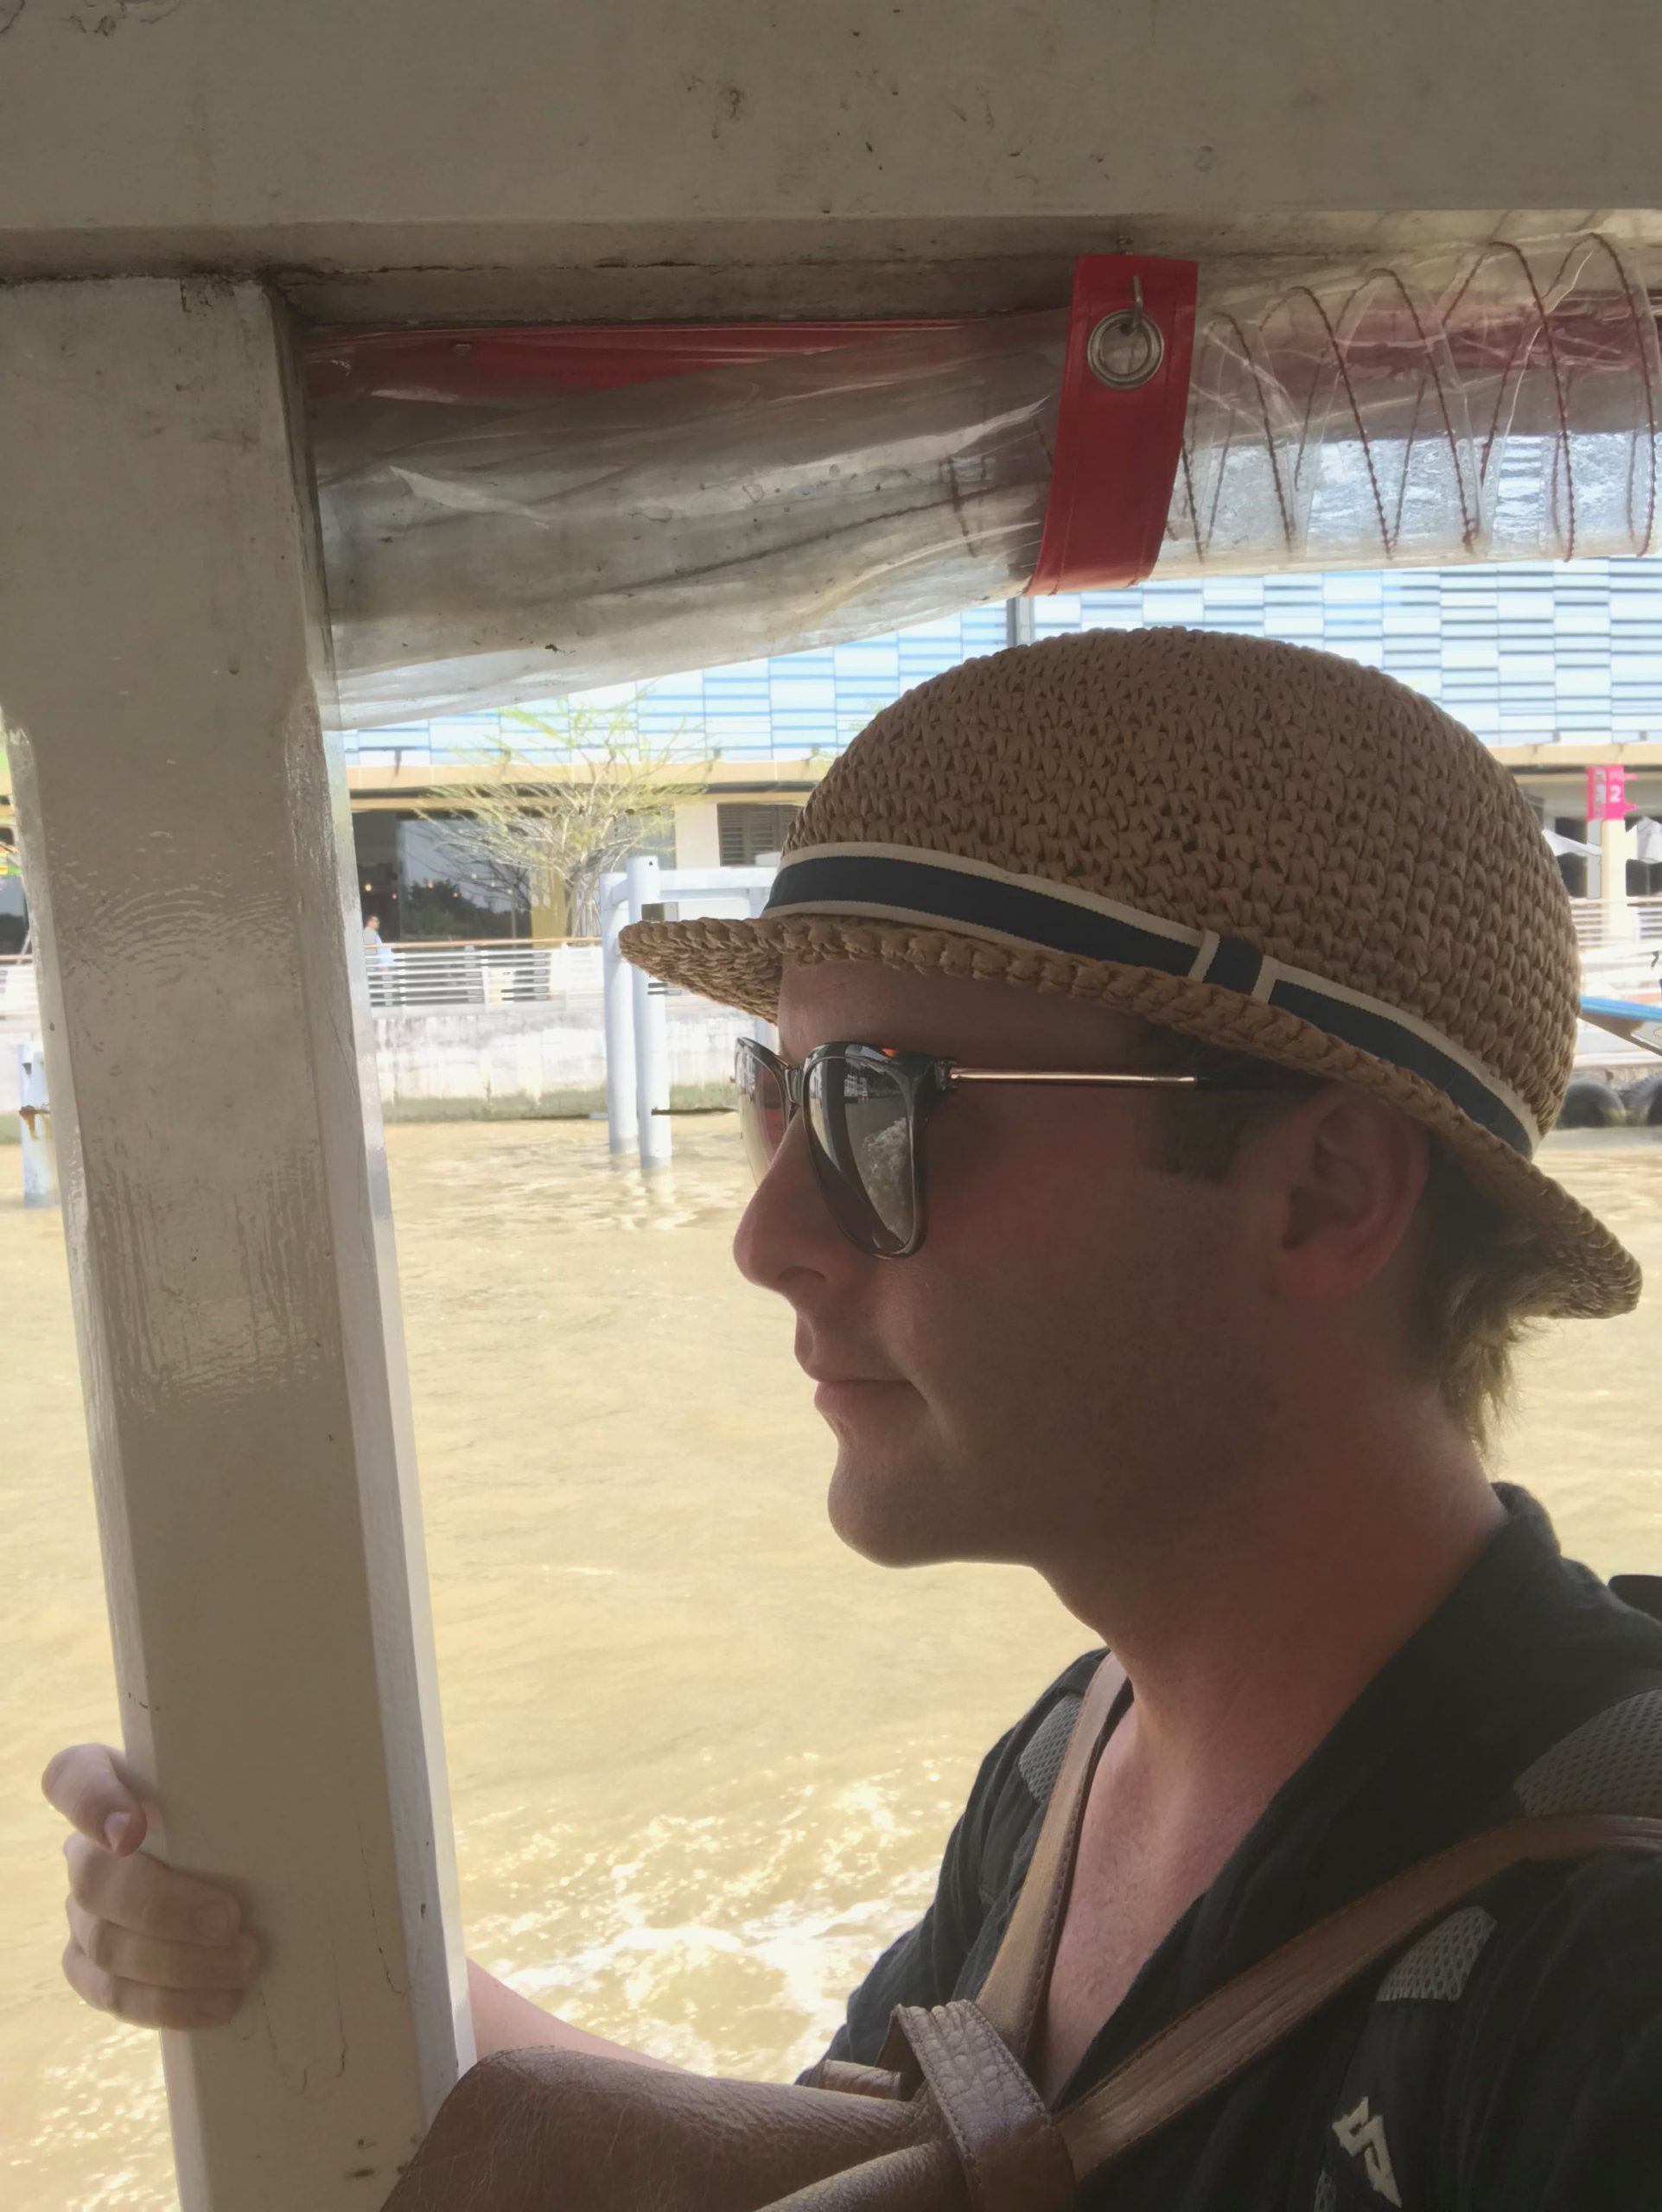 Ben with Kathmandu backpack on boat in Thailand